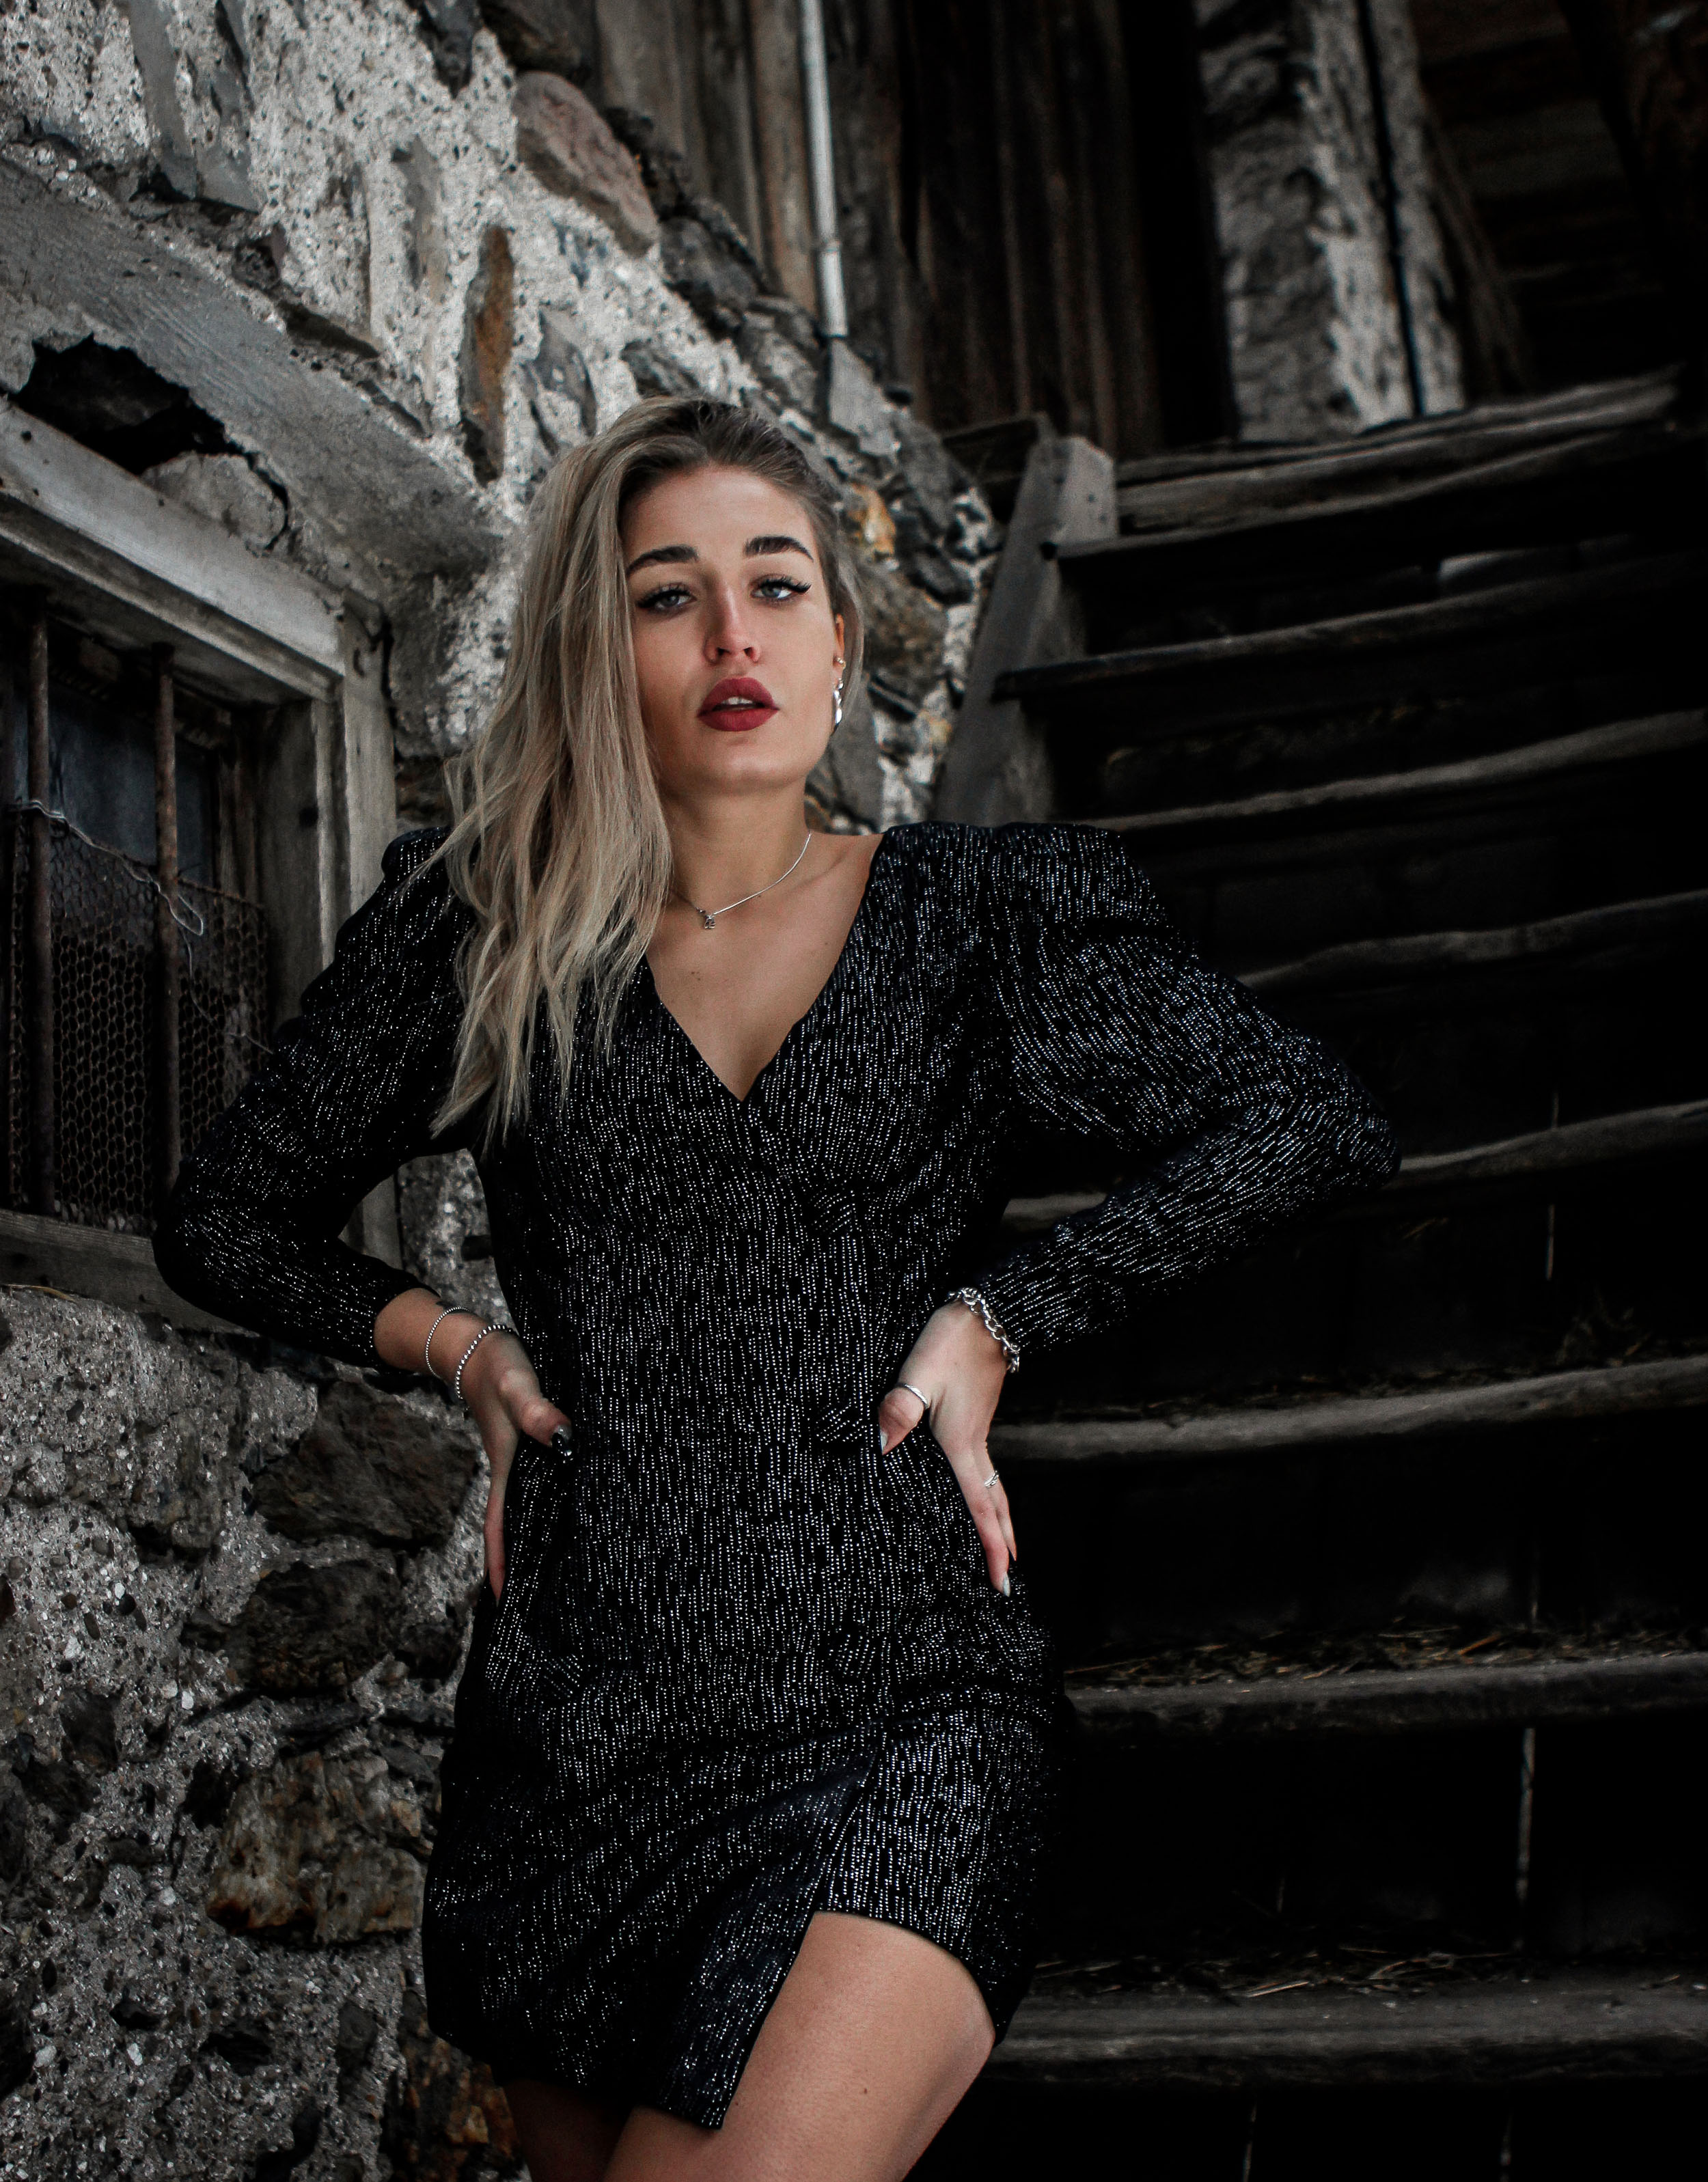 Lauralamode Silvester New Year 2019 2020 Happy New Year New Years Eve Outfit Silvester Outfit Fashion Outfit Look Berlin Munich Fashionblogger Modeblogger